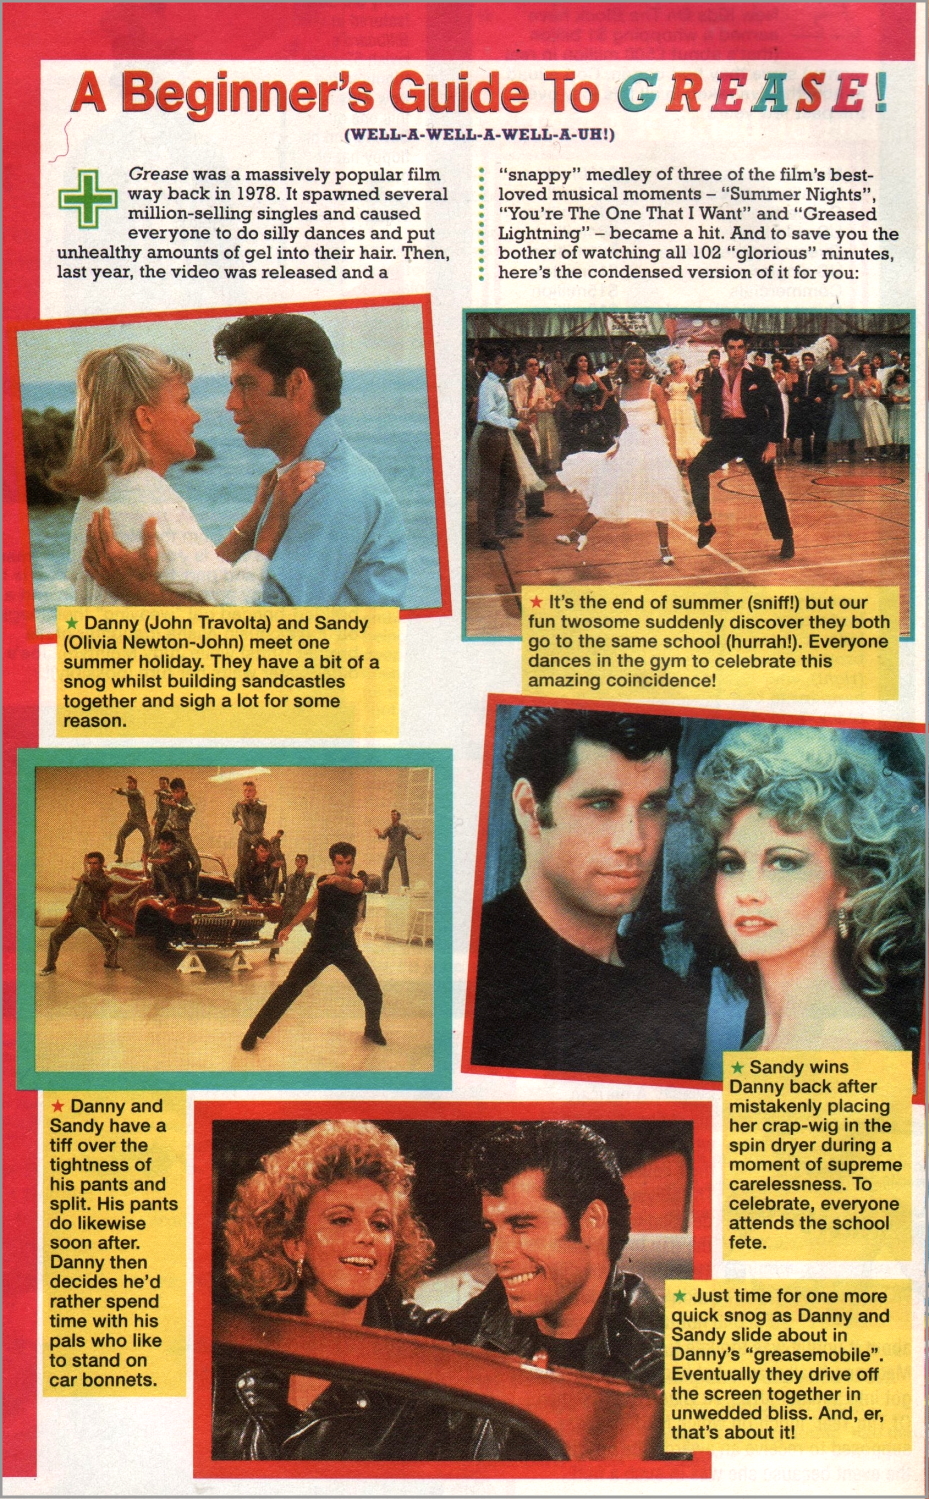 A Beginner's Guide To Grease - Smash Hits